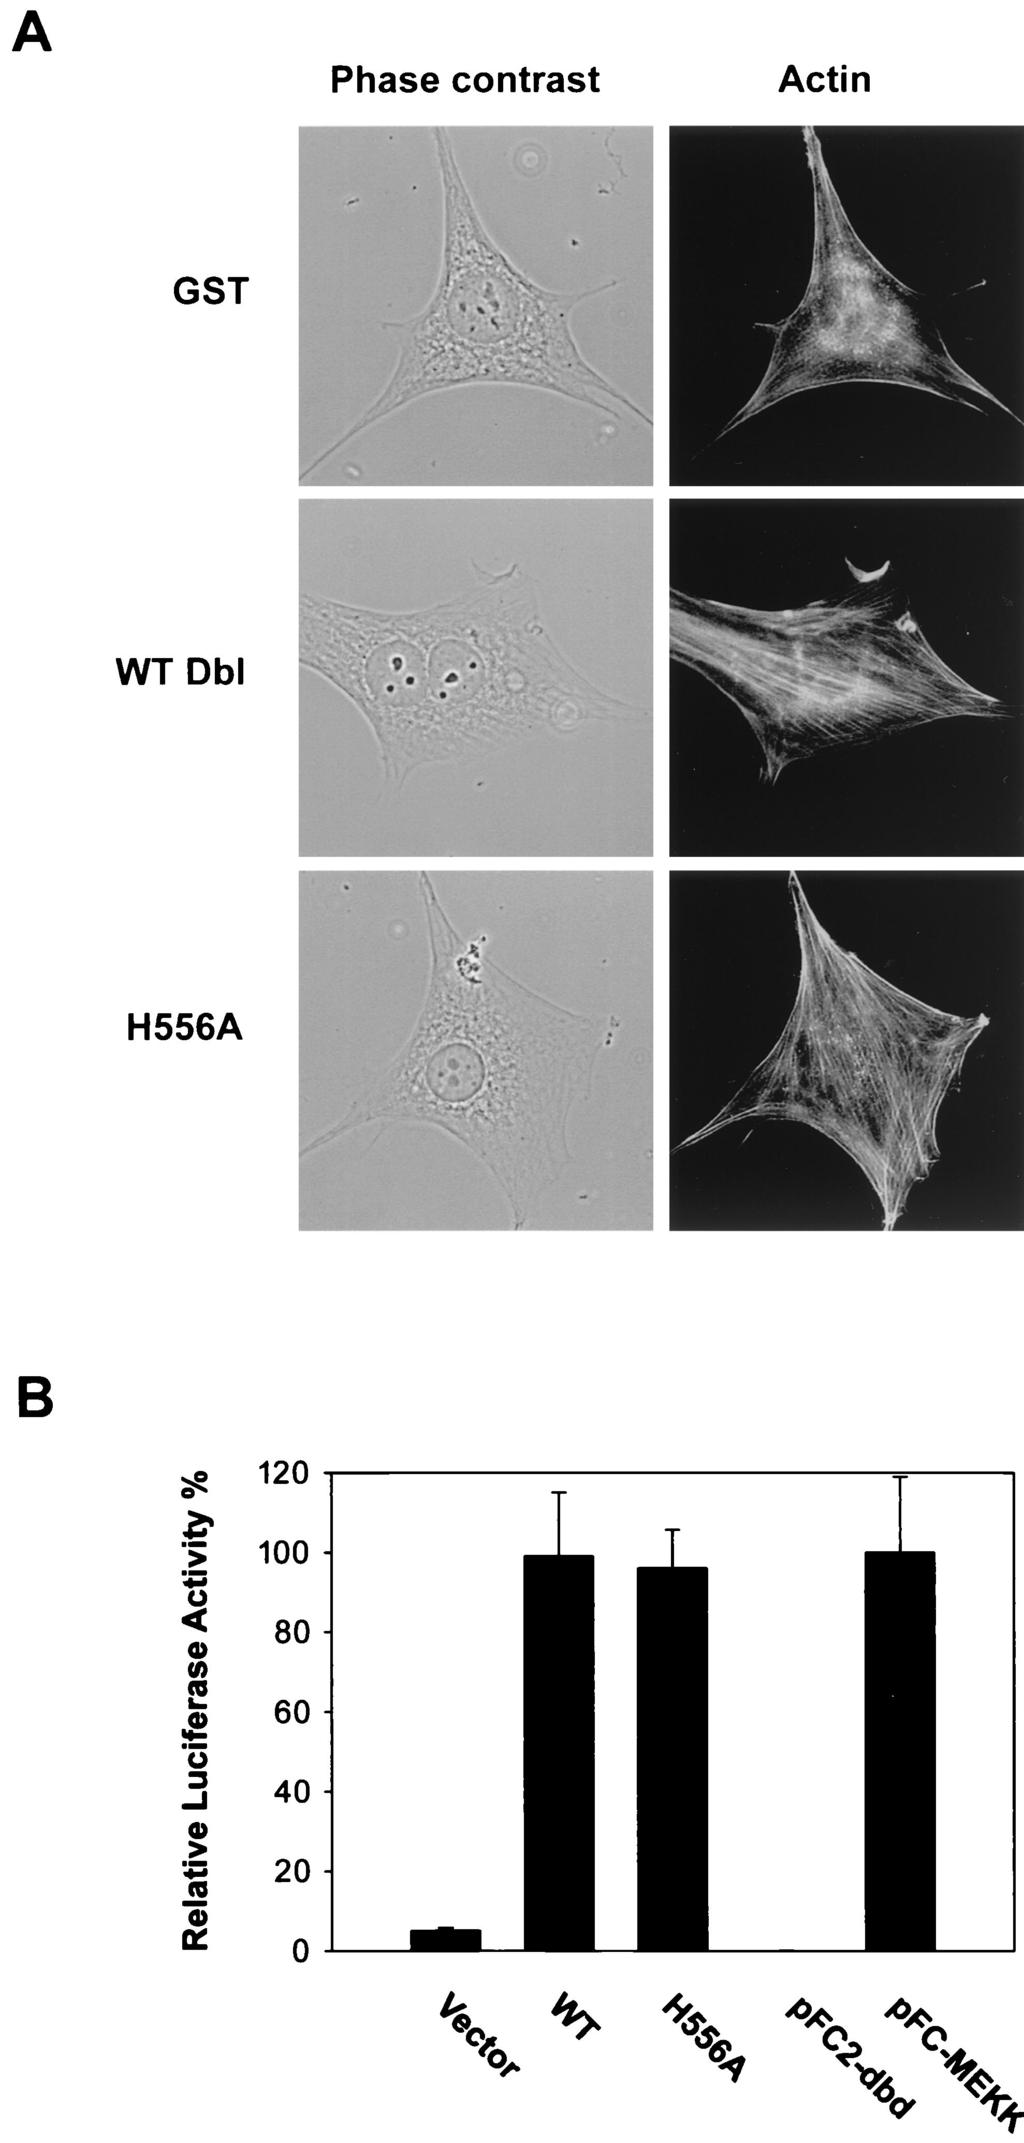 432 ZHU ET AL. MOL. CELL. BIOL. FIG. 8. Growth properties of the H556A mutant-expressing NIH 3T3 cells.